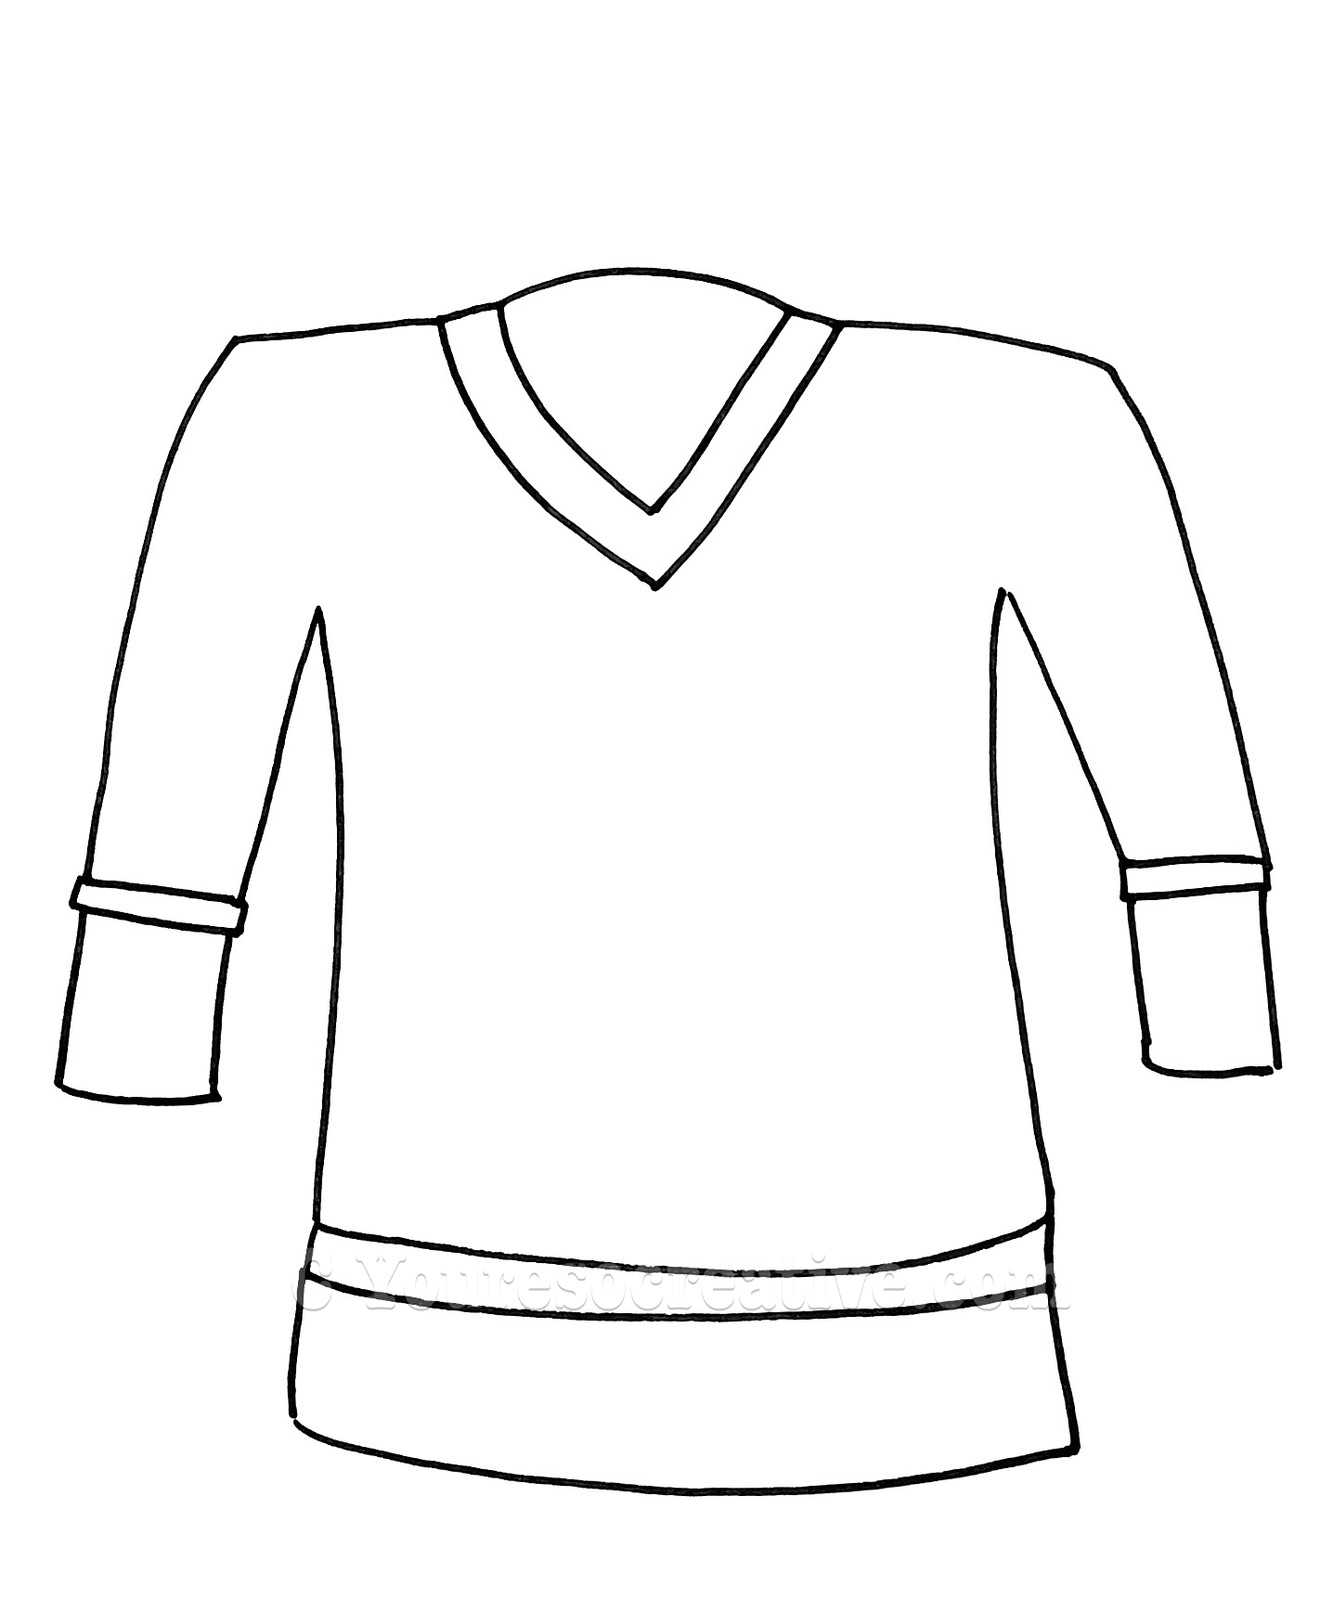 jersey drawing